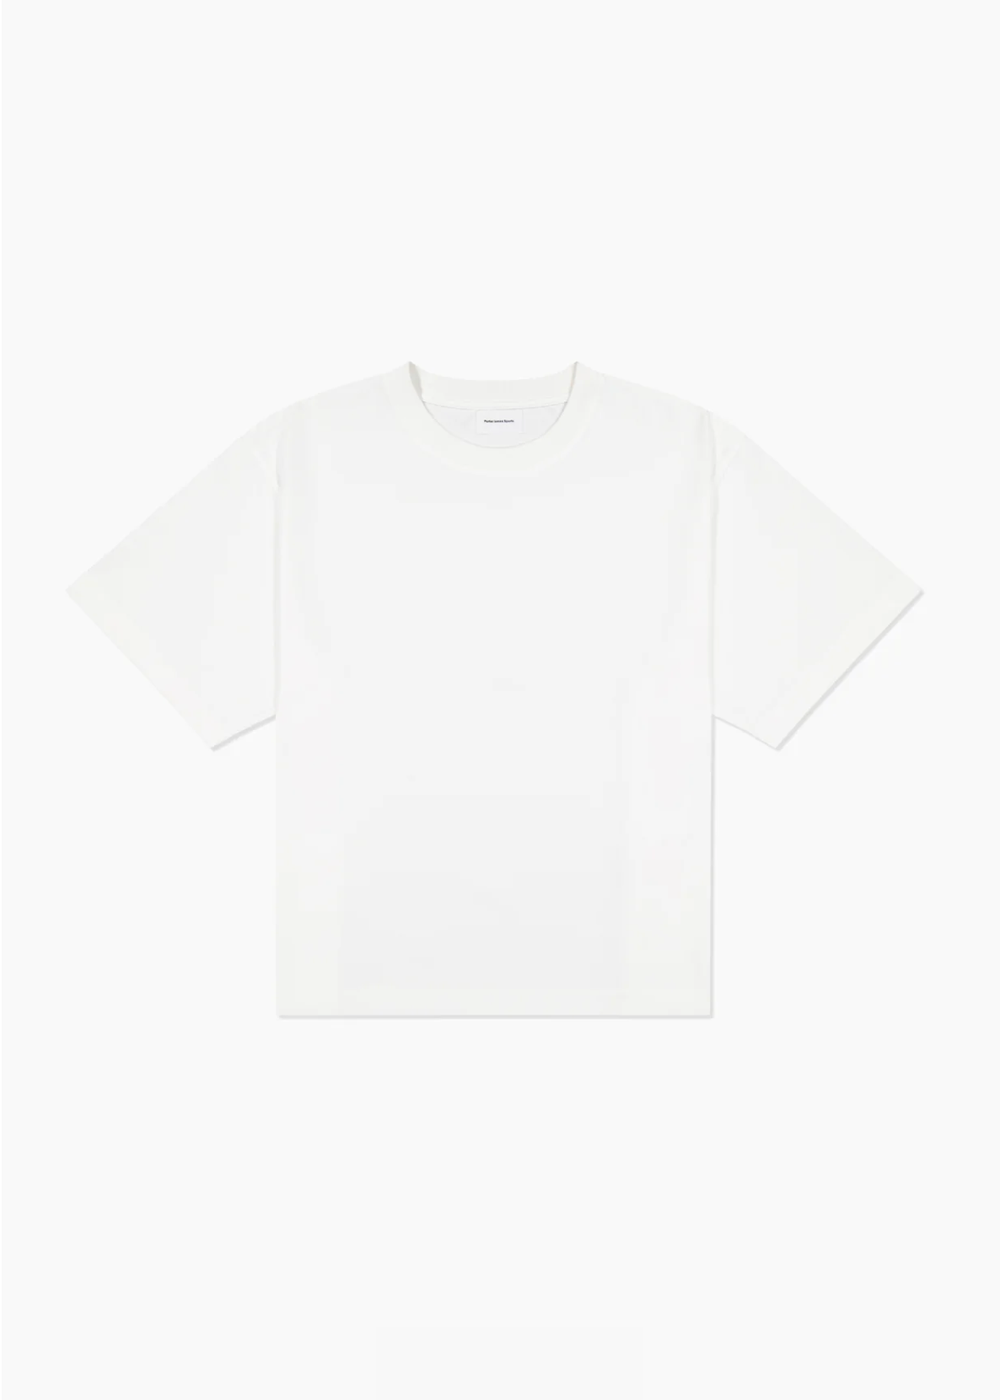 UNIFORM TEE OFF WHITE | PORTER JAMES SPORTS | Mad About The Boy